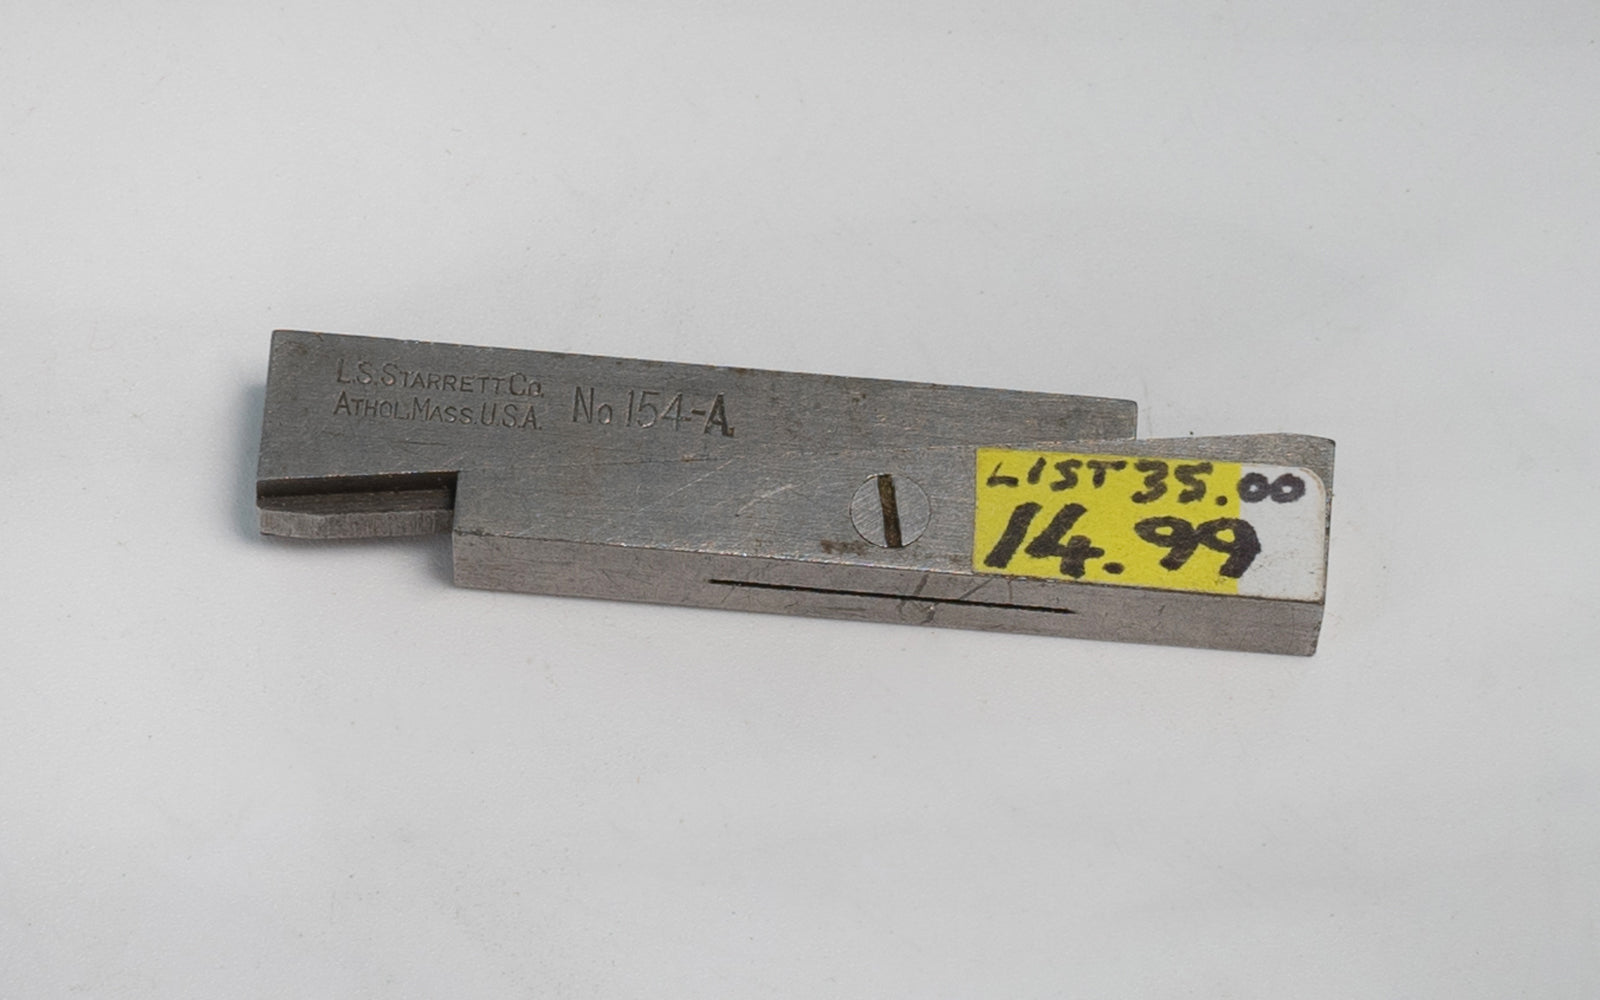 Starrett Adjustable Parallel No 154-A - USED. Working range is 3/8" to 1/2".  Made in USA.